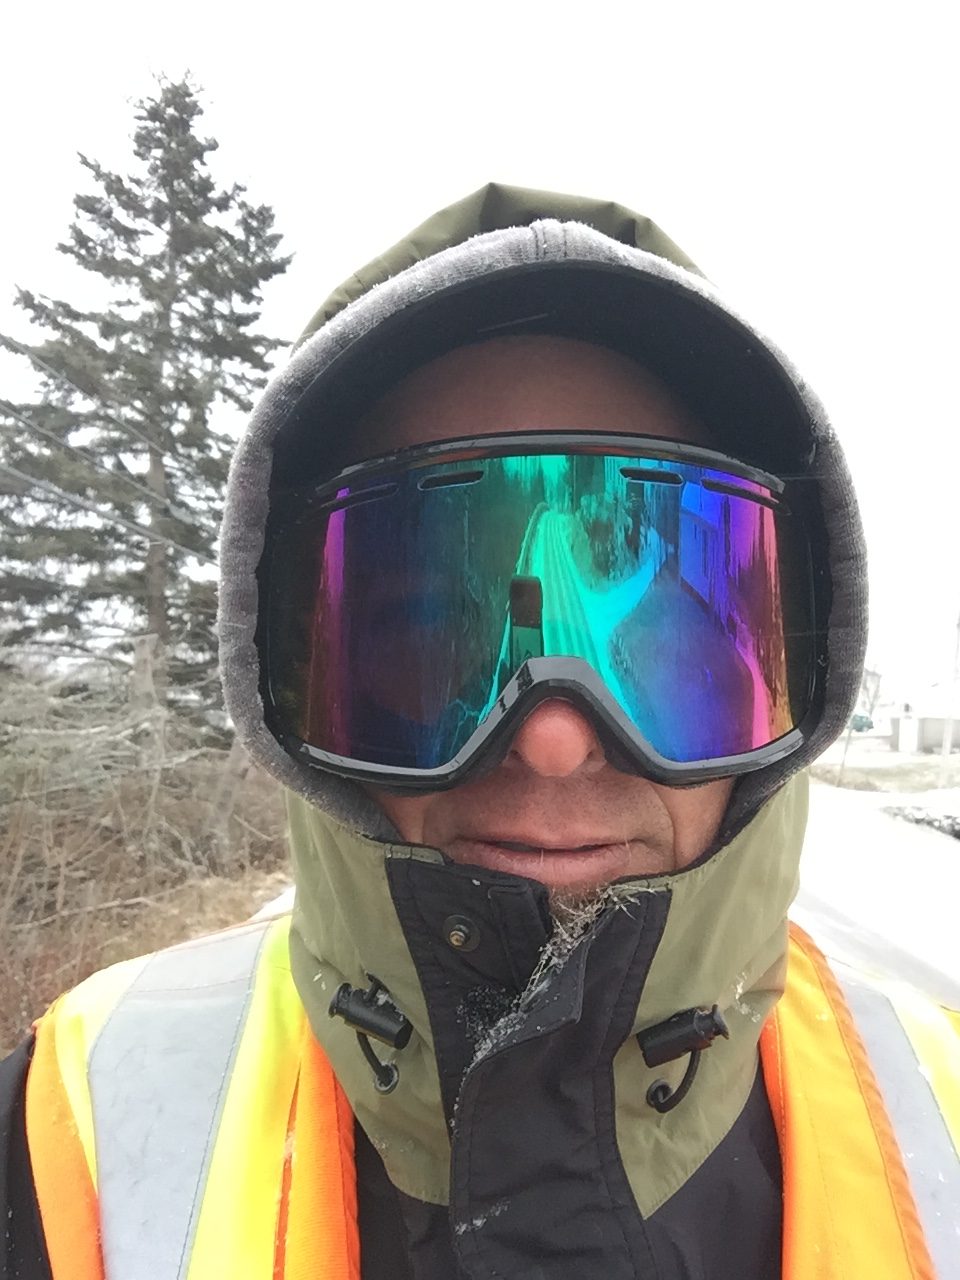 How do you decide to bike across Canada in the winter when you hate winter?